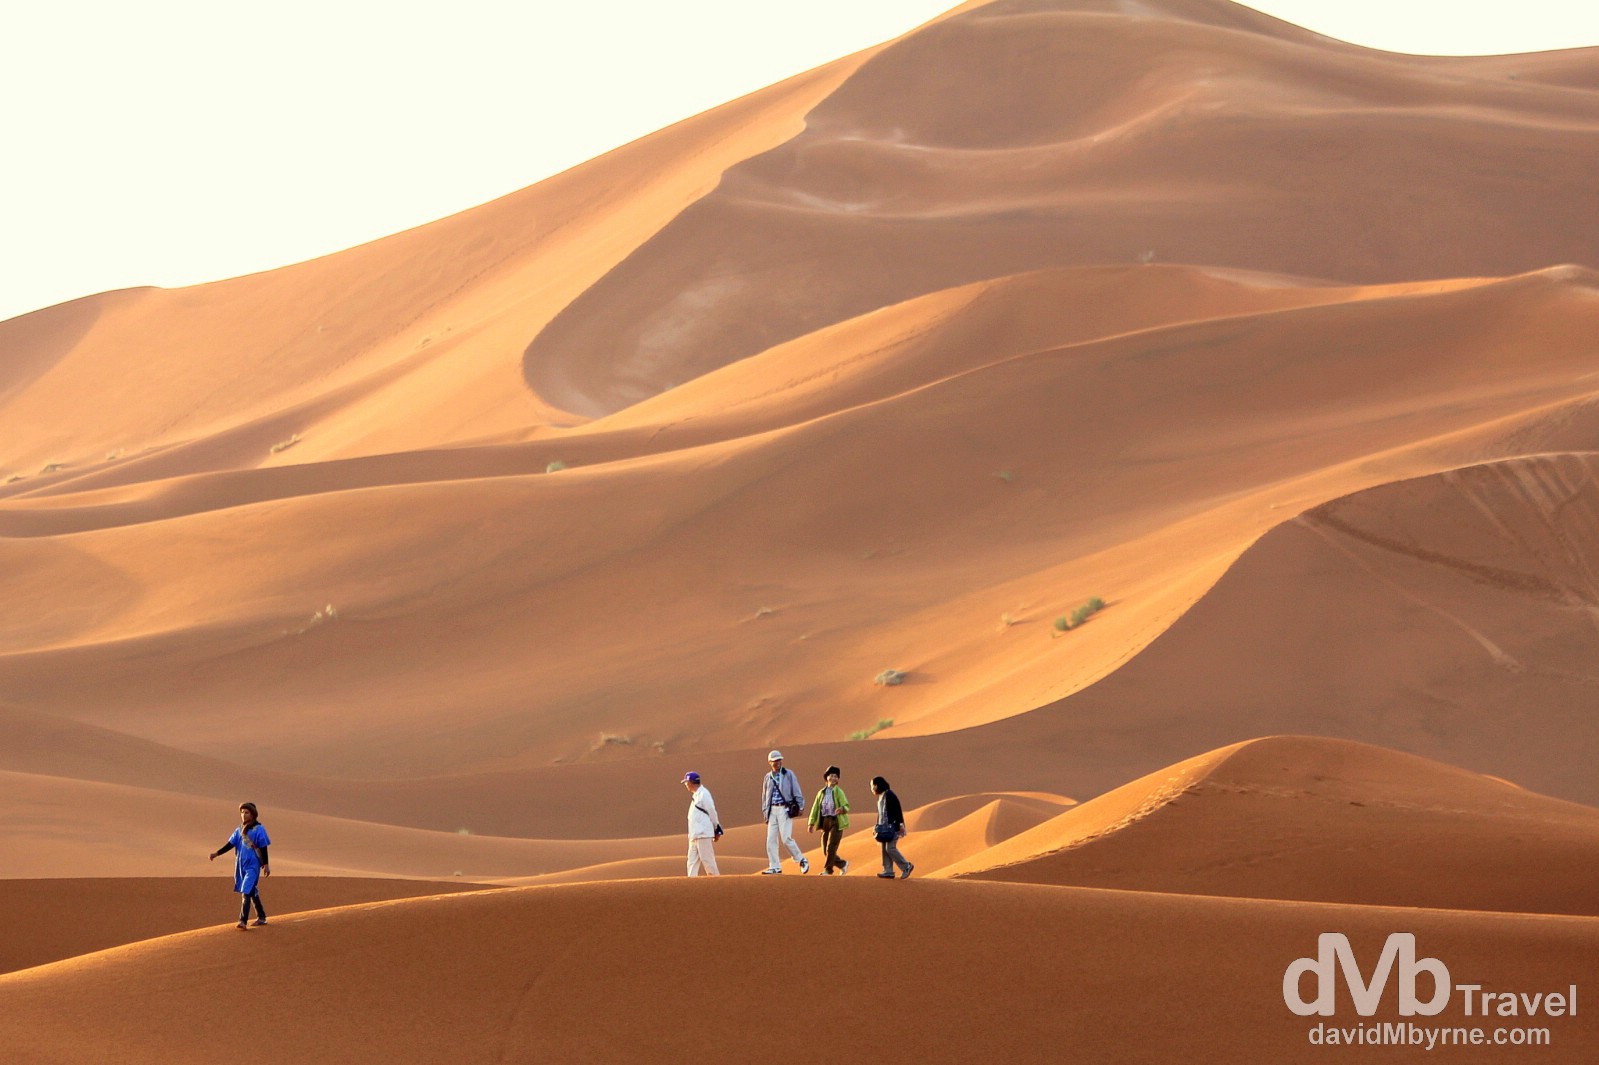 An early morning stroll among the massive sand dunes of Erg Chebbi in Morocco. May 19th, 2014. 